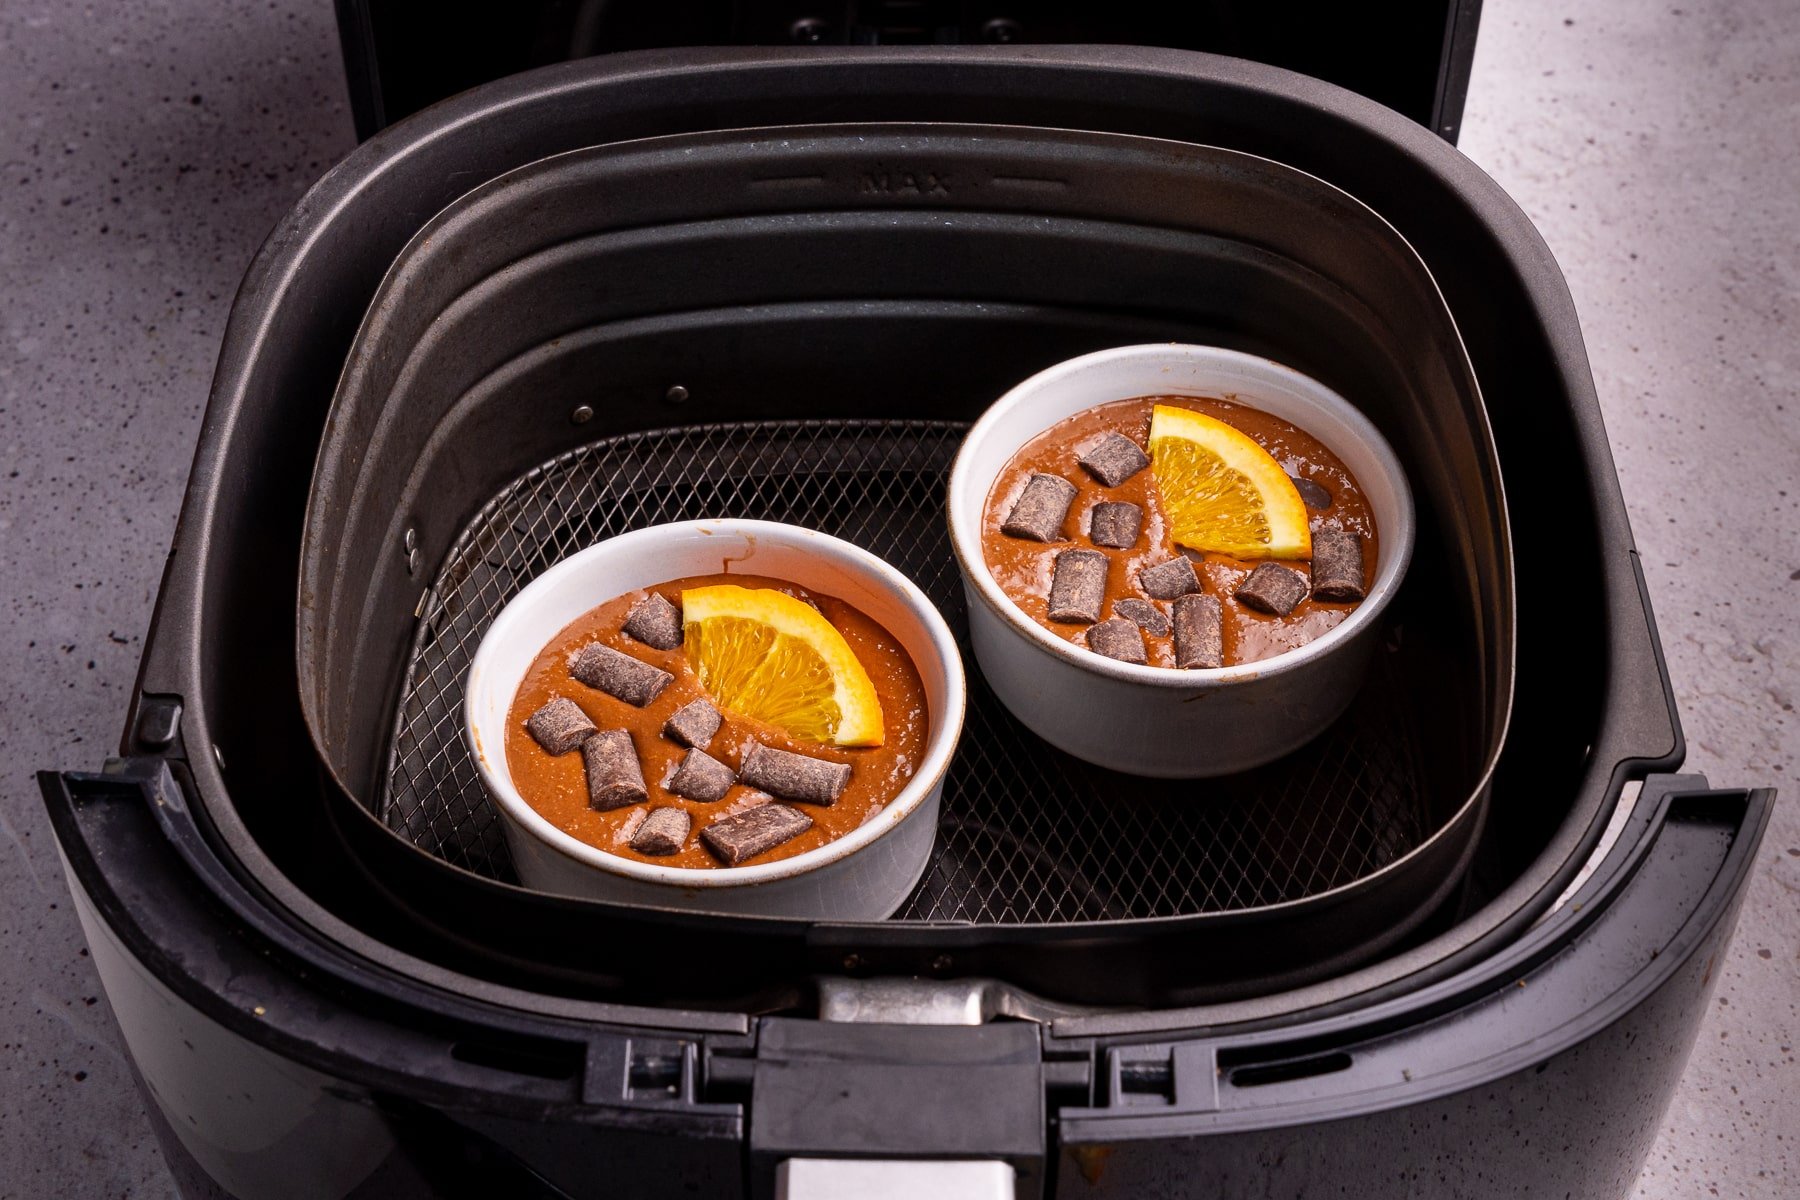 uncooked chocolate orange blended baked oats in an air fryer basket